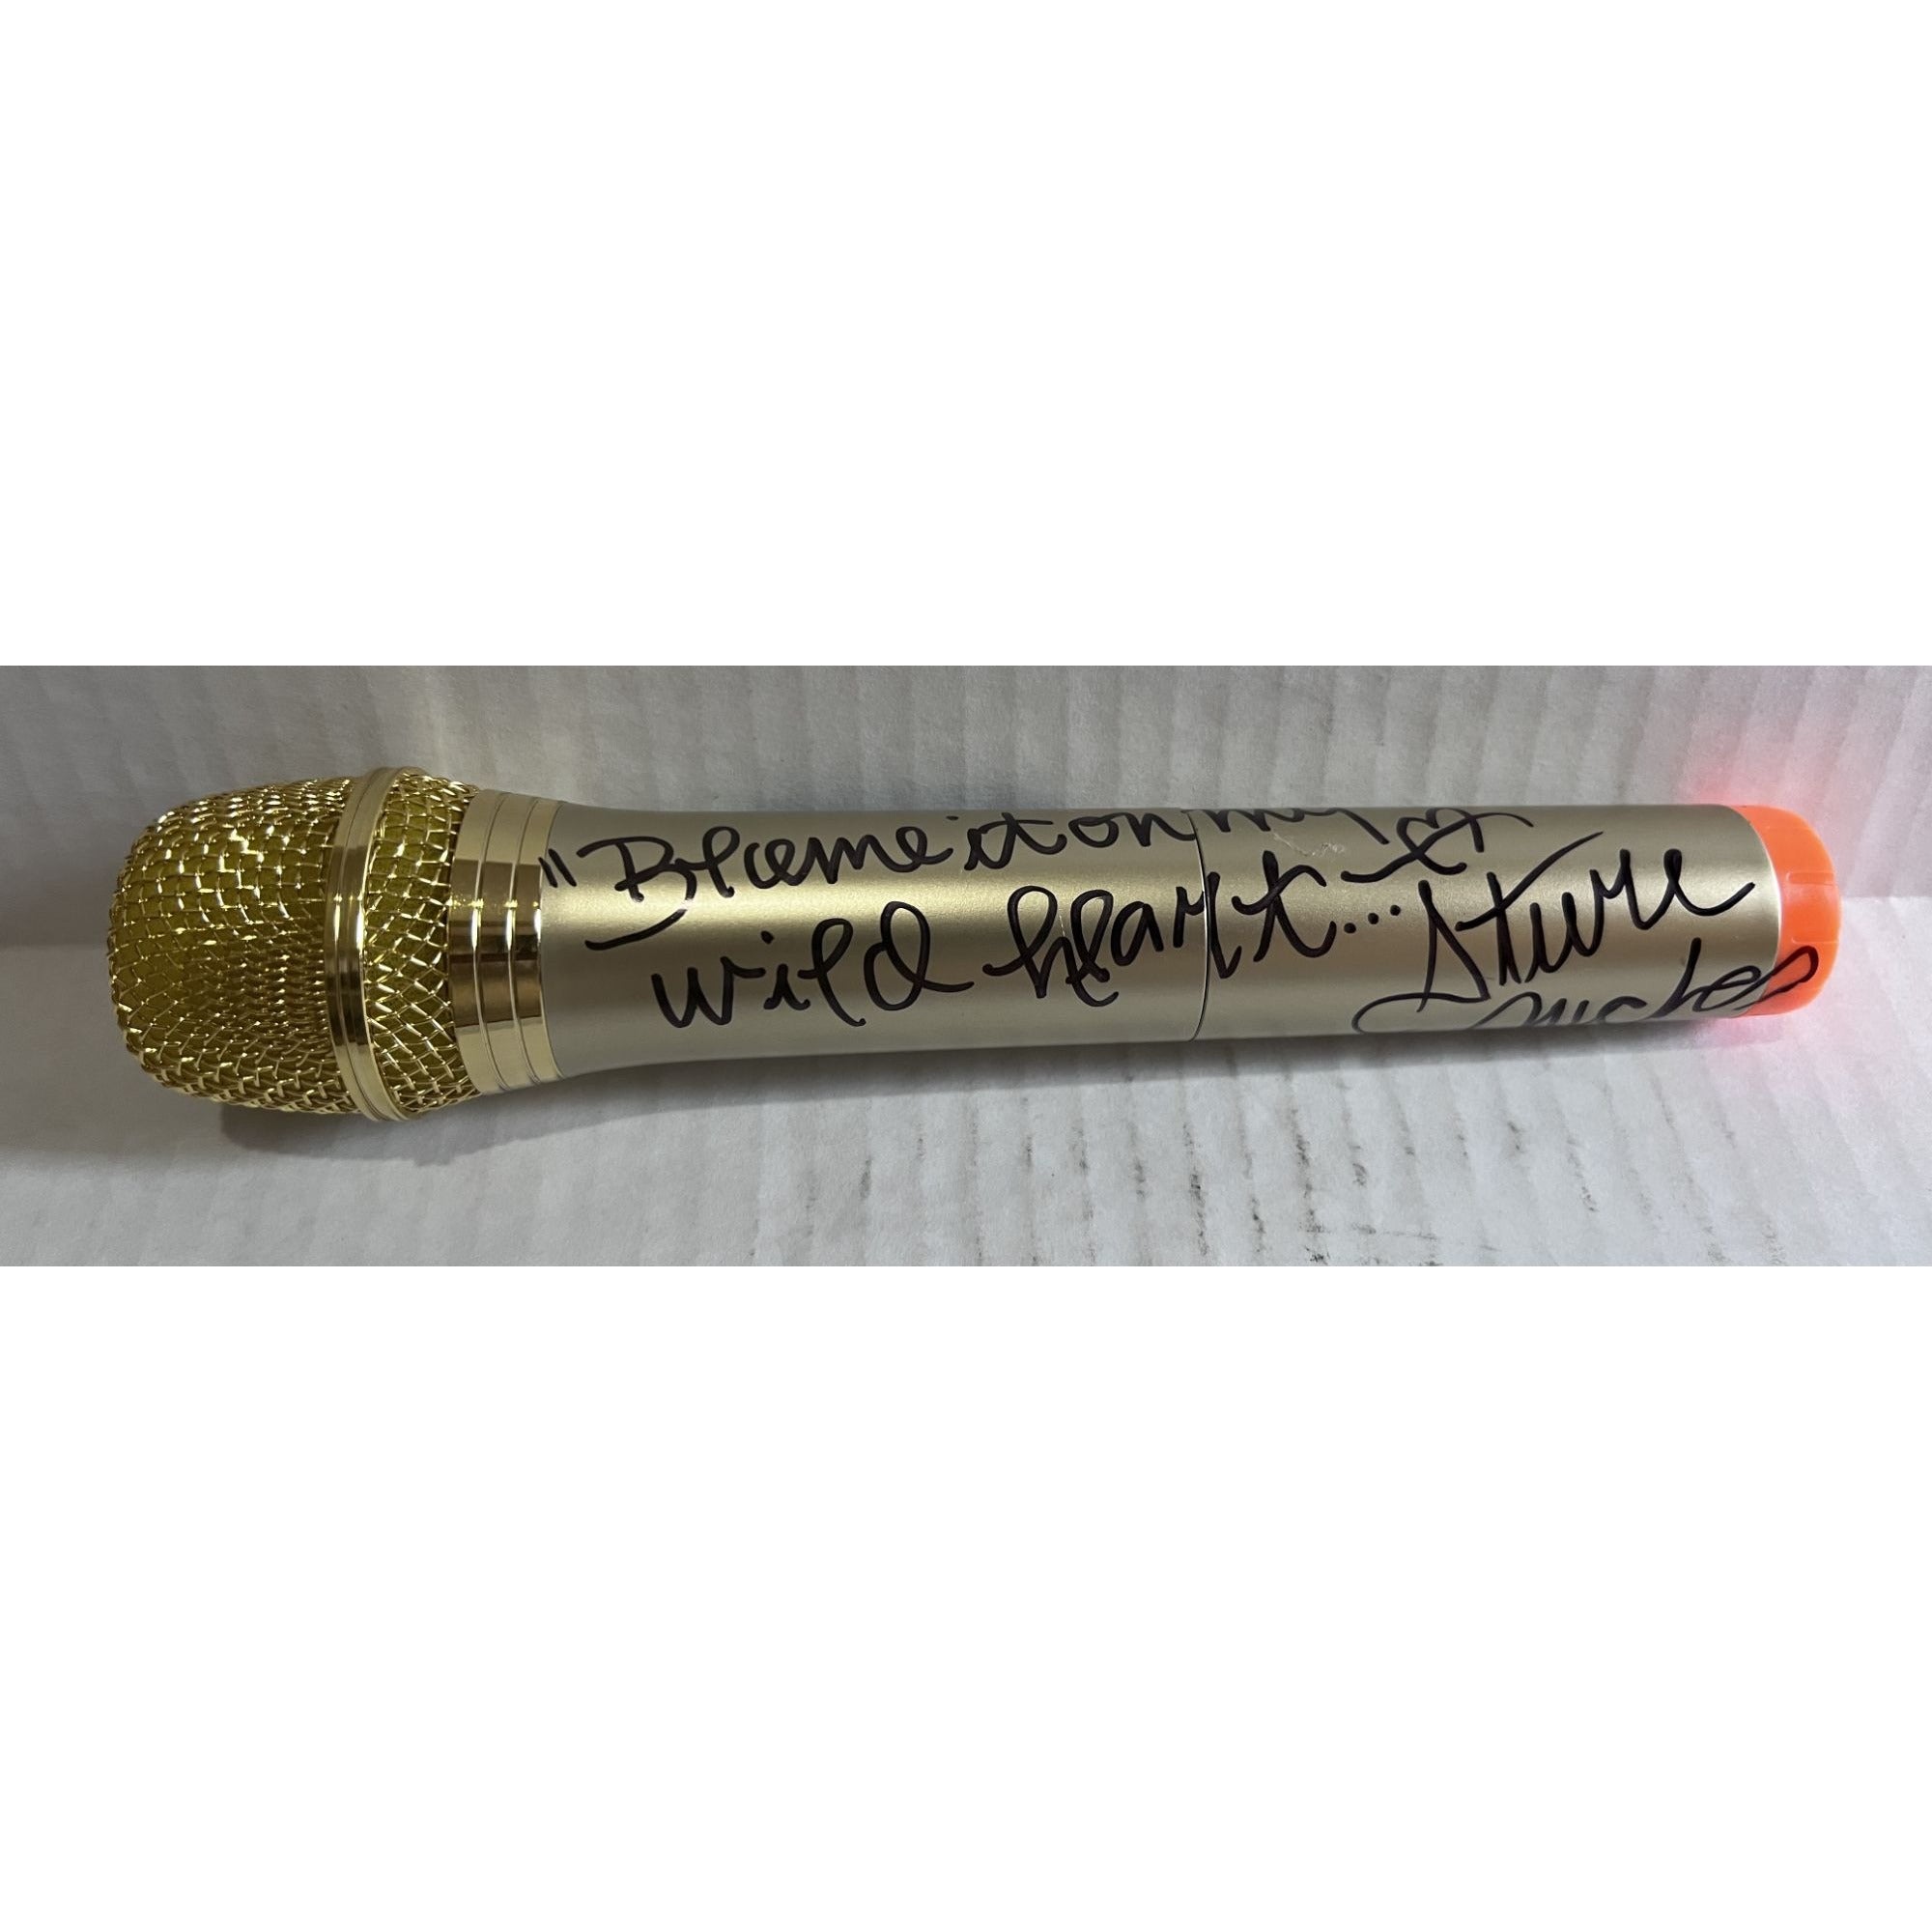 Stevie Nicks Fleetwood Mac microphone signed with proof